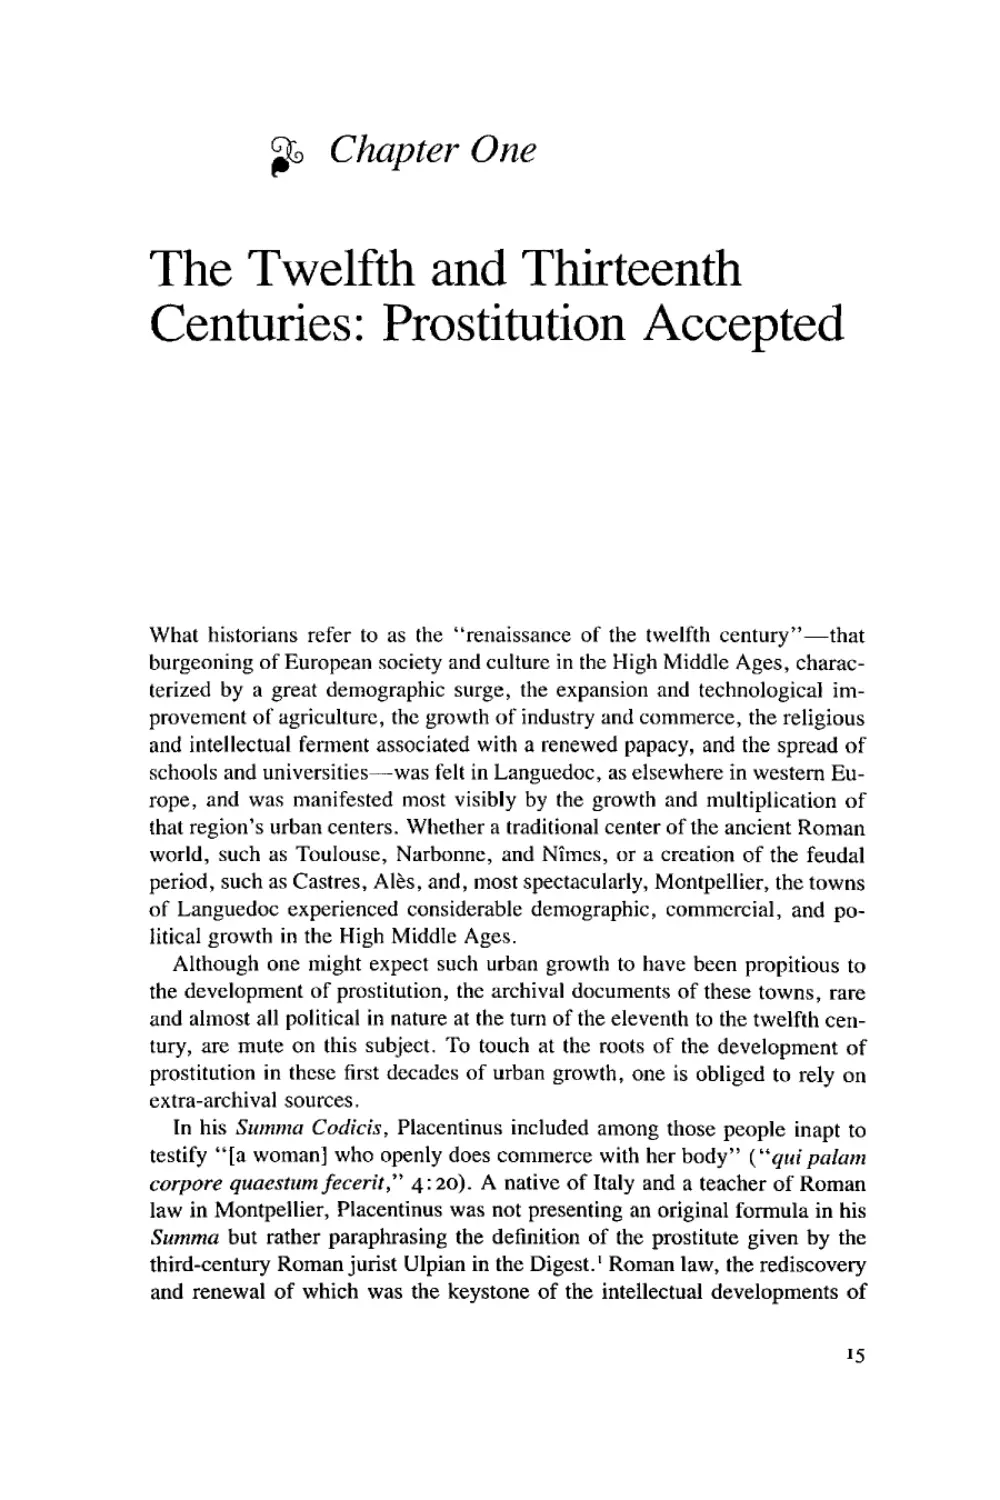 1. The Twelfth and Thirteenth Centuries: Prostitution Accepted